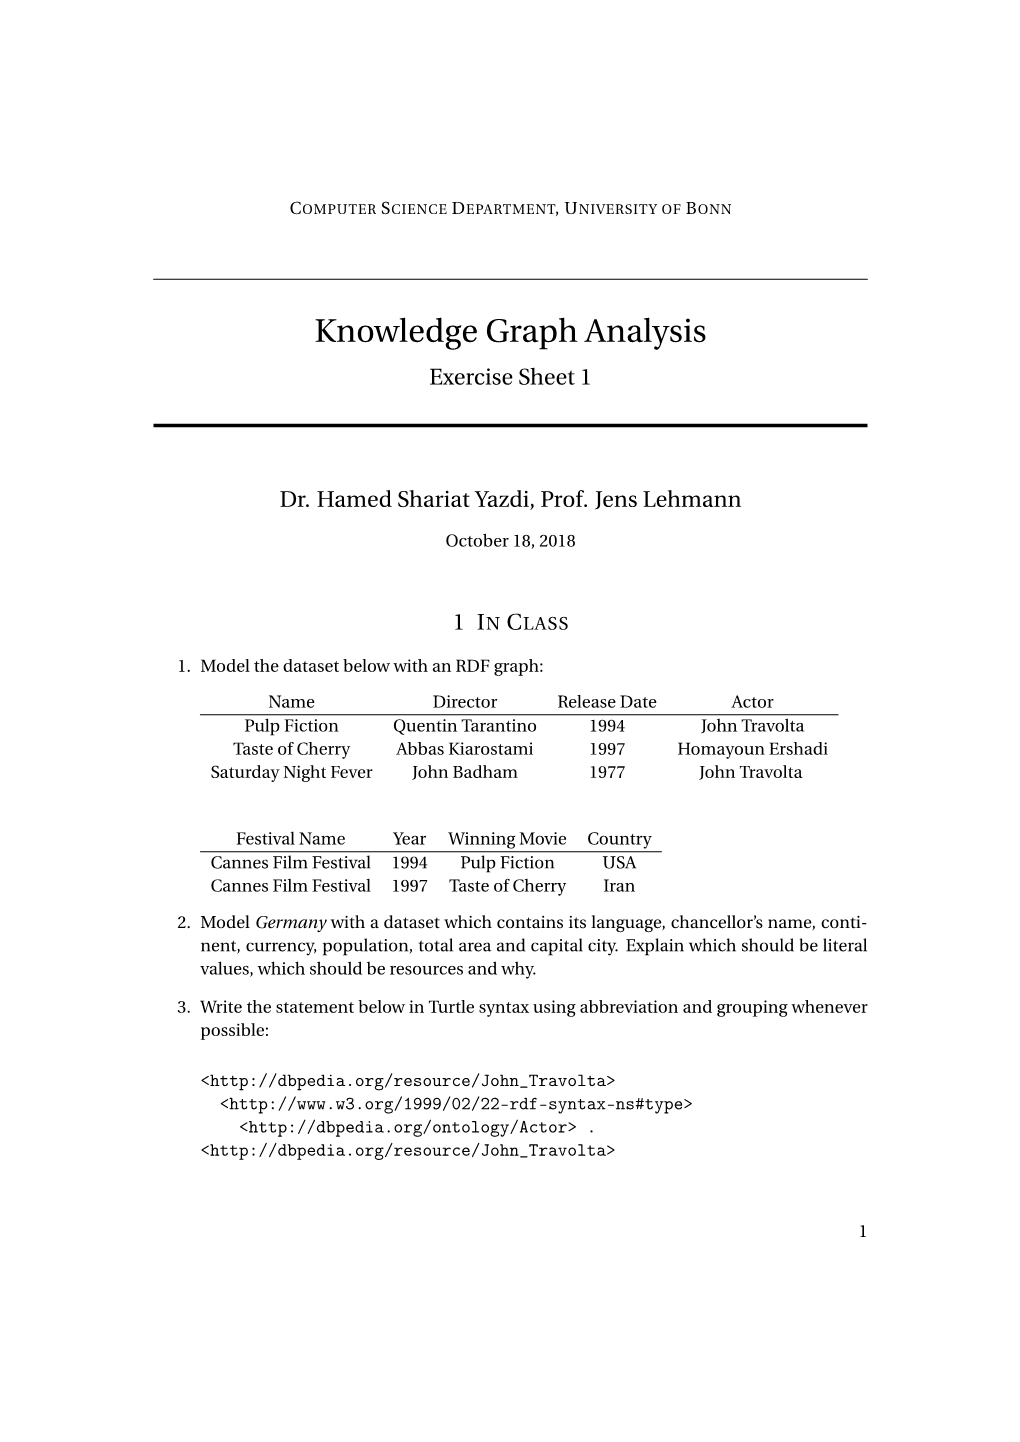 Knowledge Graph Analysis Exercise Sheet 1